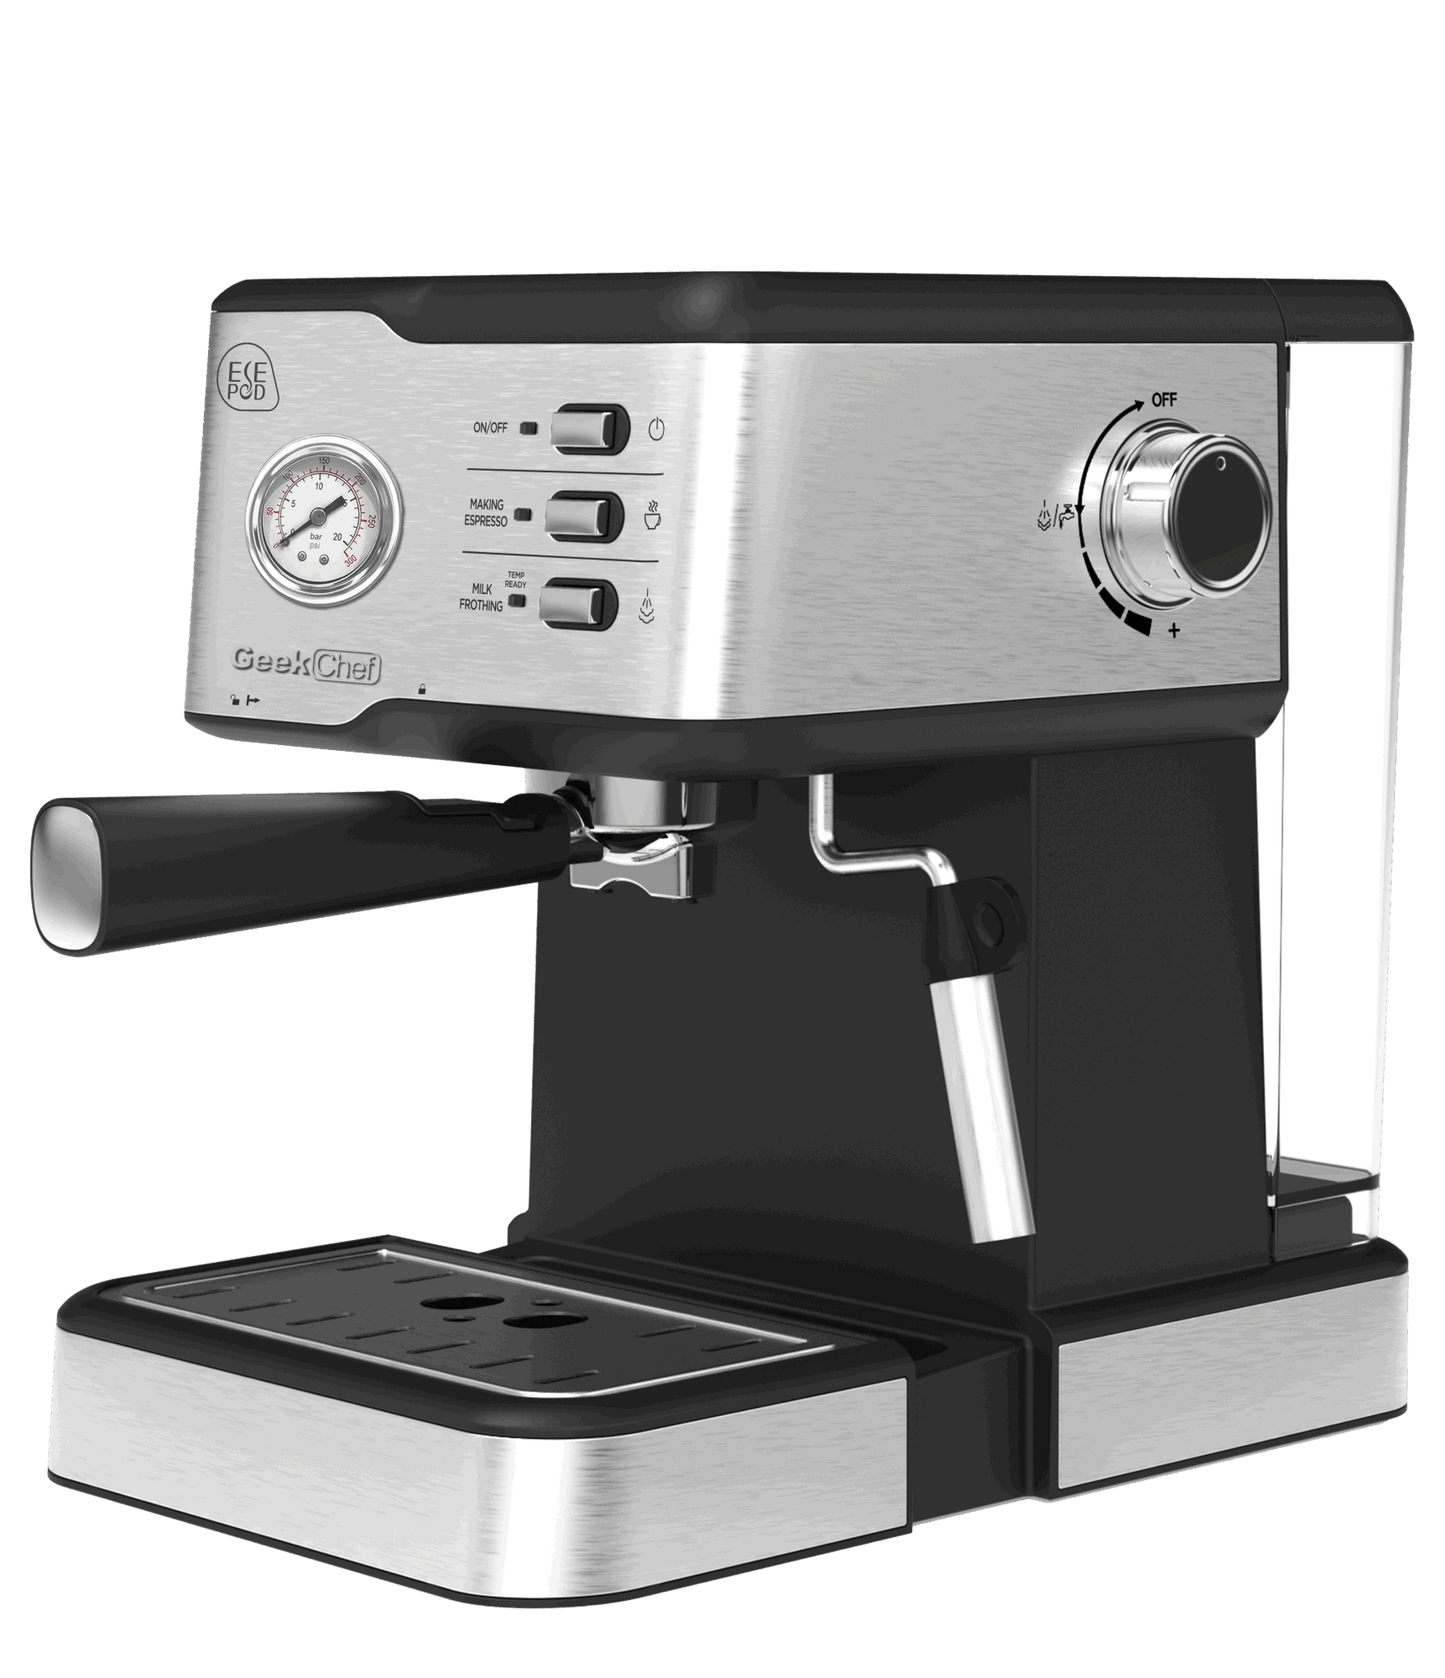 Geek Chef Espresso Machine;  Espresso and Cappuccino latte Maker 20 Bar Pump Coffee Machine Compatible with ESE POD filter&Milk Frother Steam Wand;  for Home Barista;  950W;  1.5L Water Tank